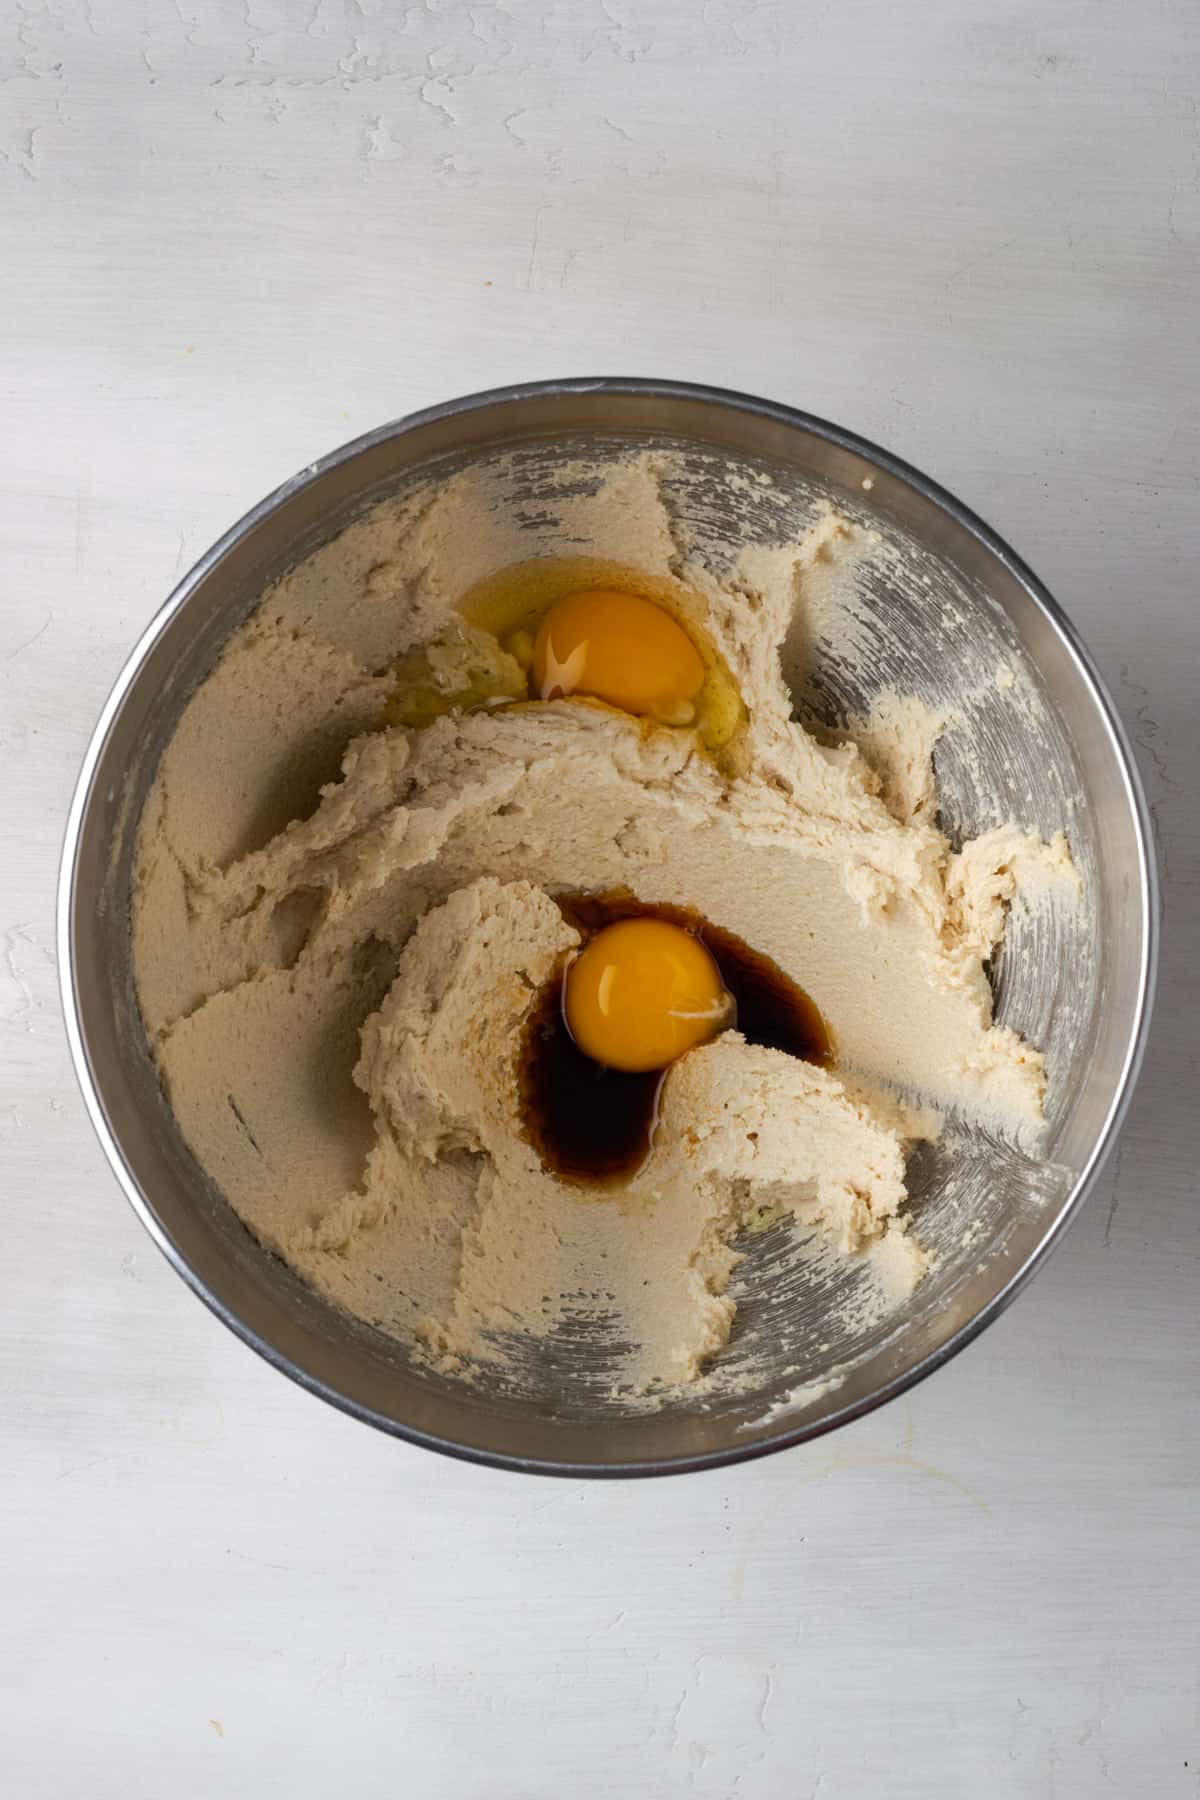 An egg, egg yolk and vanilla added to the creamed butter and sugar mixture in a metal mixing bowl.